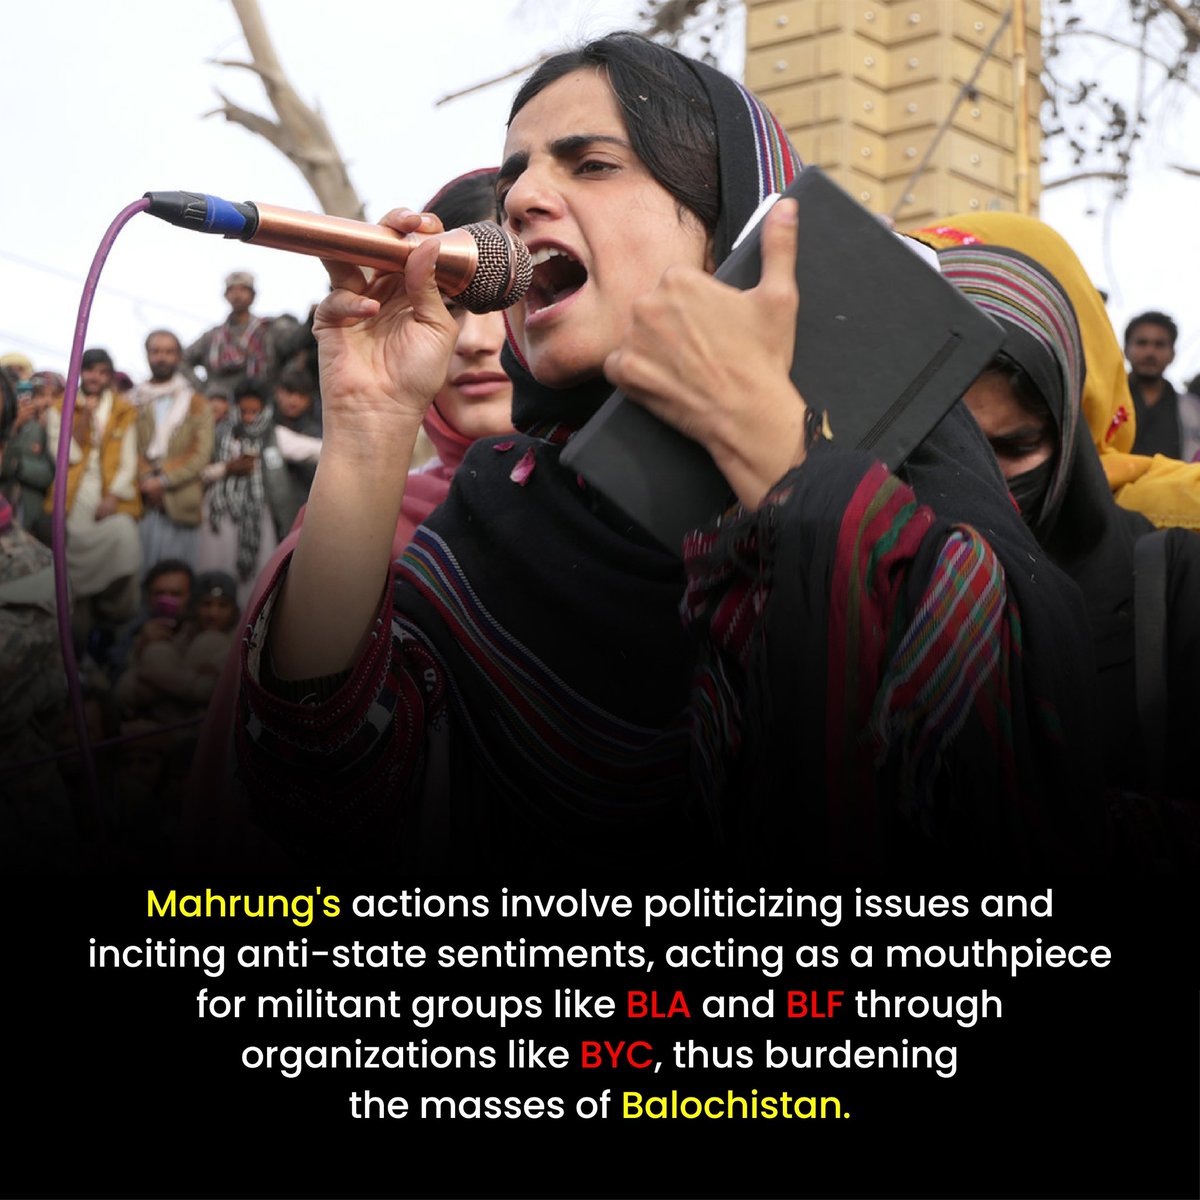 Mahrung's actions involve politicizing issues and inciting anti-state sentiments, acting as a mouthpiece for militant groups like BLA and BLF through organizations like BYC, thus burdening the masses of Balochistan.
#SayNoToTerrorism
 #Perletti
#Balochistan